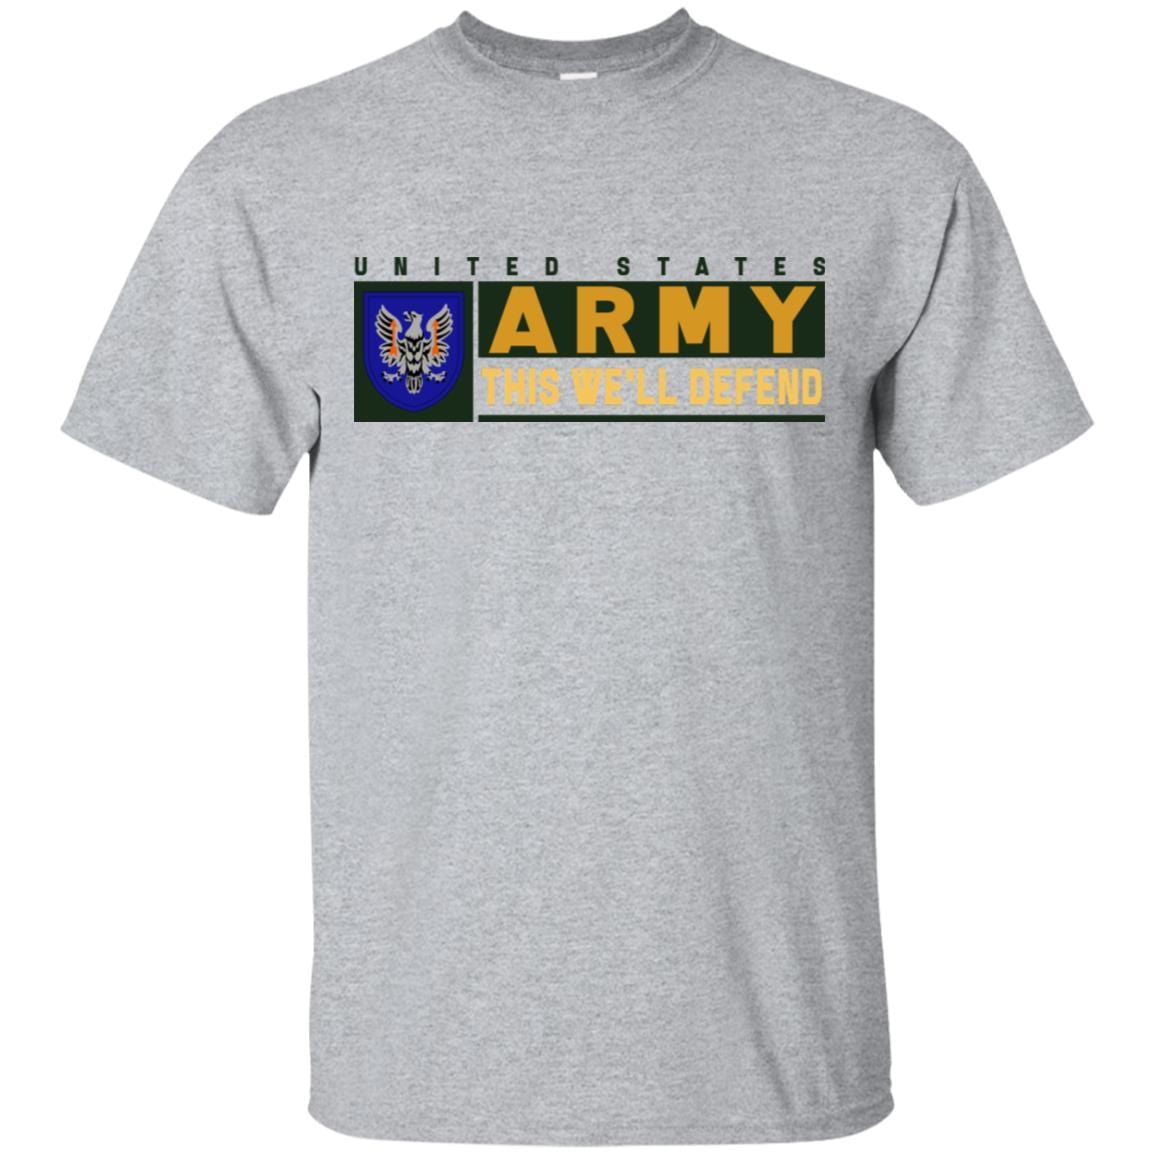 US Army 11TH AVIATION COMMAND- This We'll Defend T-Shirt On Front For Men-TShirt-Army-Veterans Nation